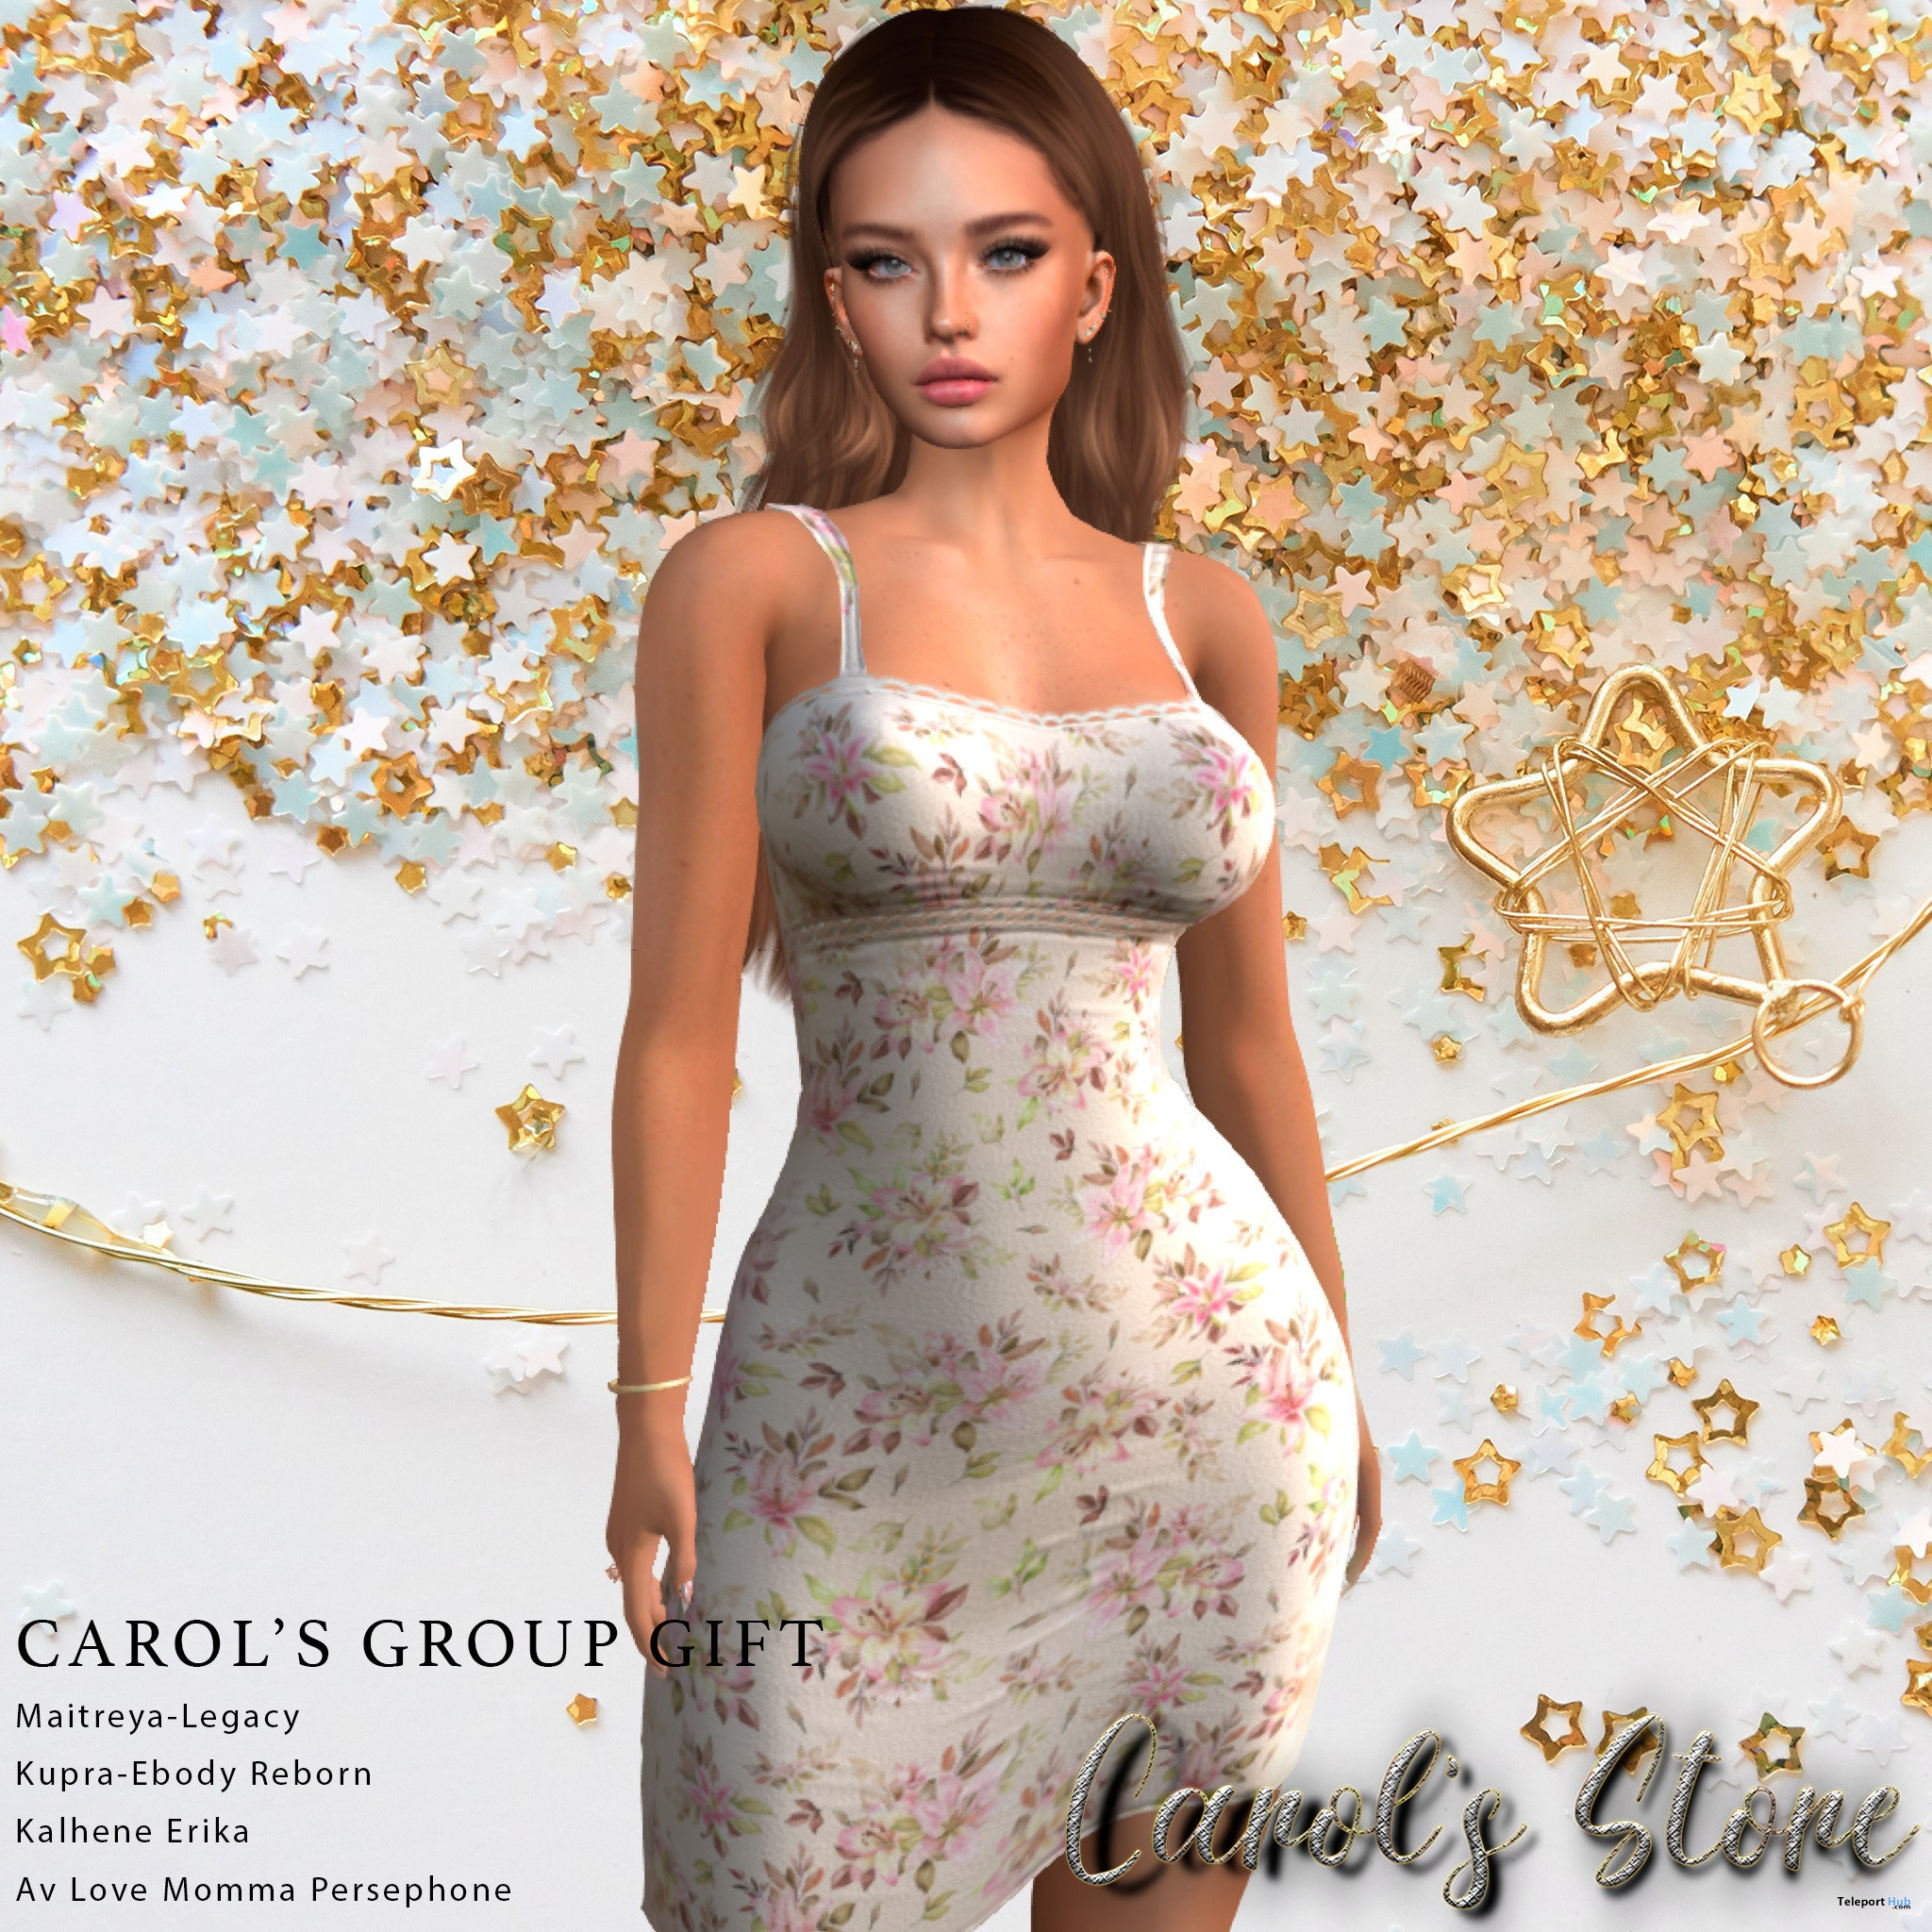 Floral Dress October 2022 Group Gift by Carol's Store - Teleport Hub - teleporthub.com